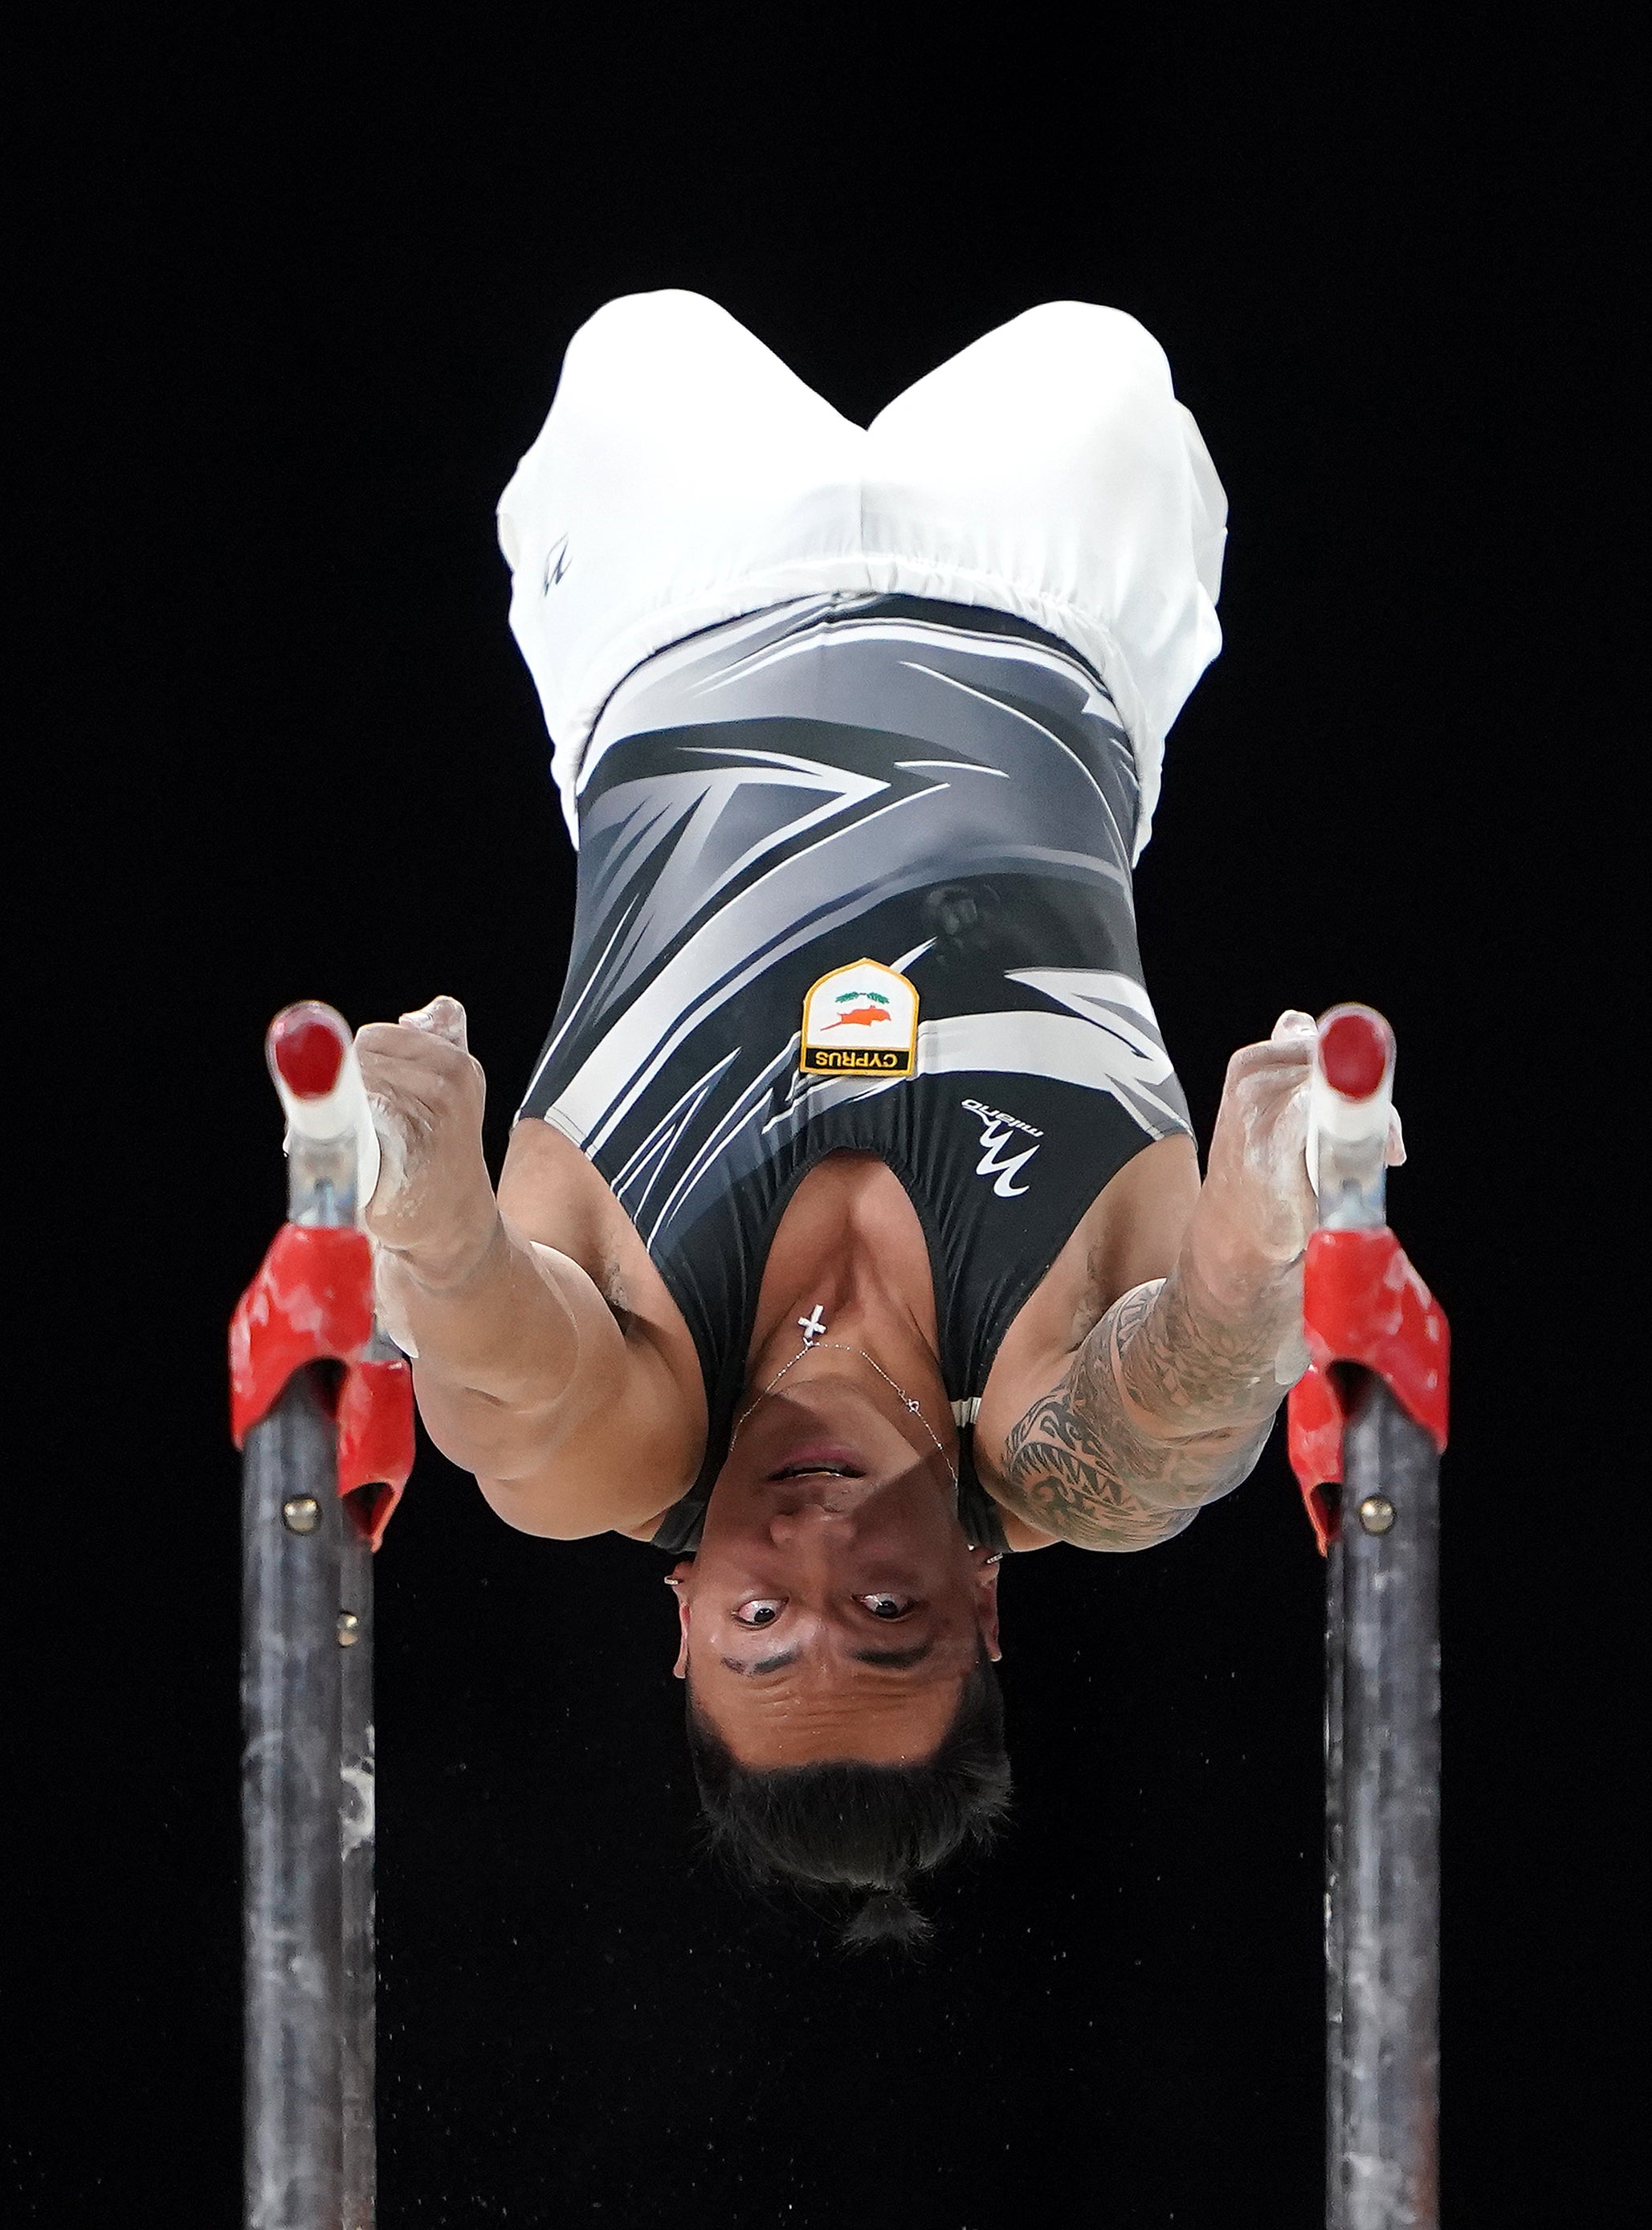 Cyprus’ Marios Georgiou in action during his parallel bars rotation at Arena Birmingham at the 2022 Commonwealth Games in Birmingham (Zac Goodwin/PA)